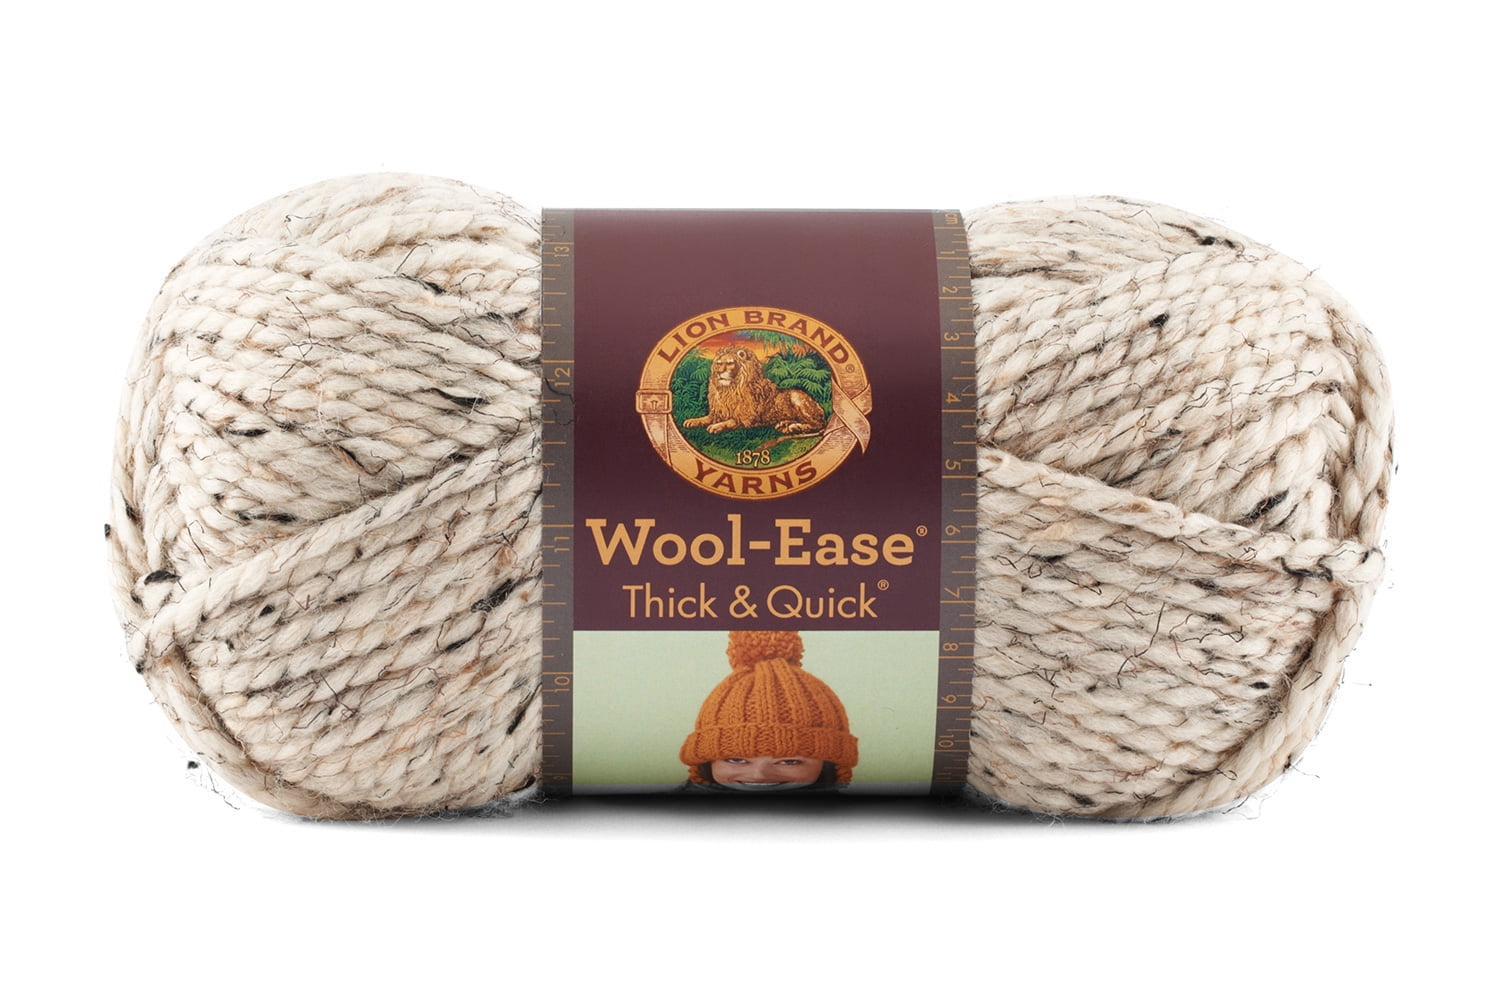 Lion Brand Yarns Wool Ease Thick & Quick Oatmeal Classic Yarn, 1 Each